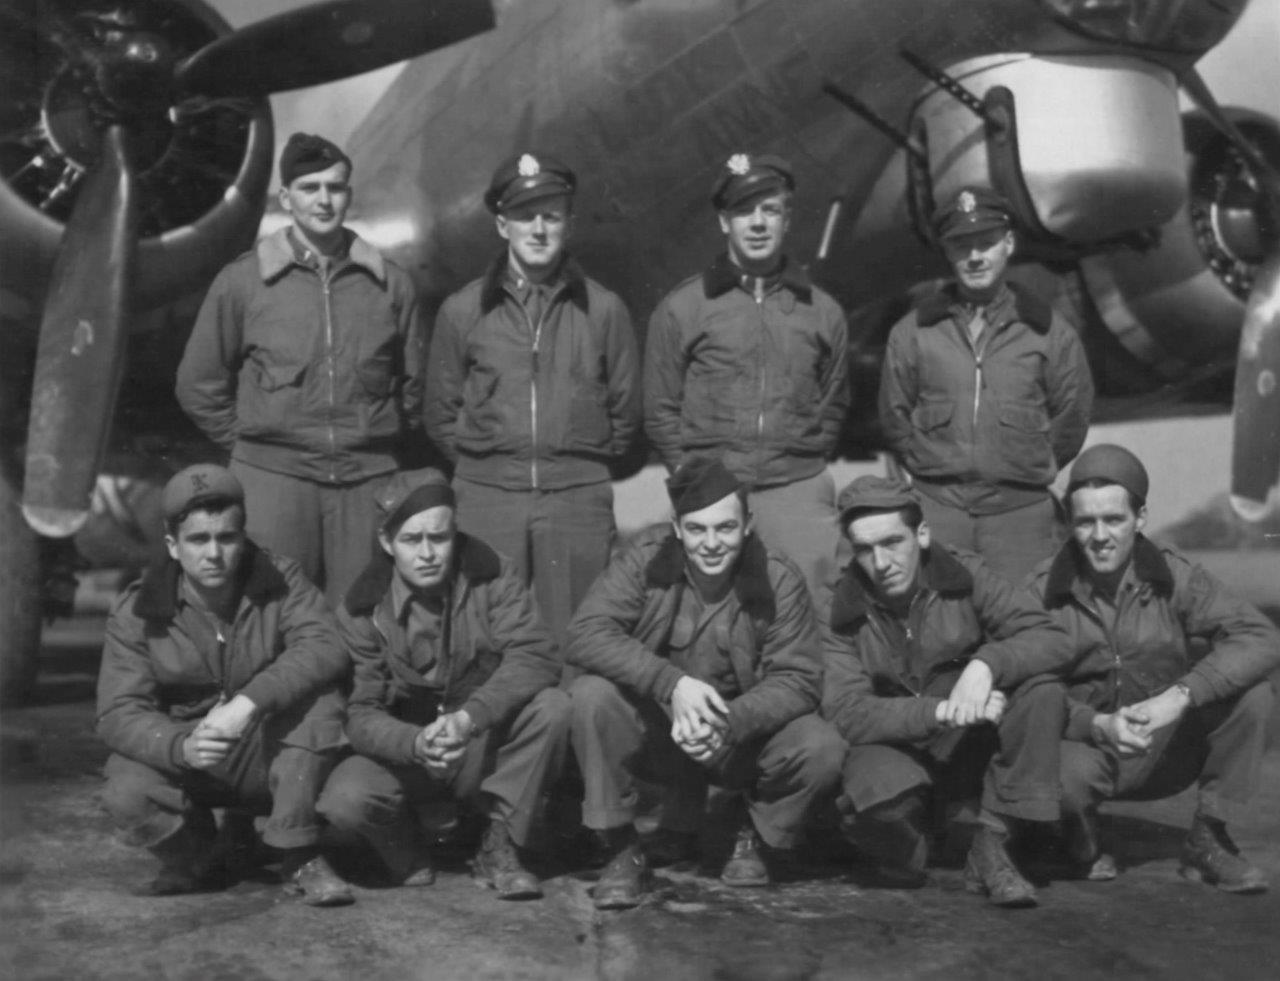 Shafer's Crew - 602nd Squadron - 16 March 1945